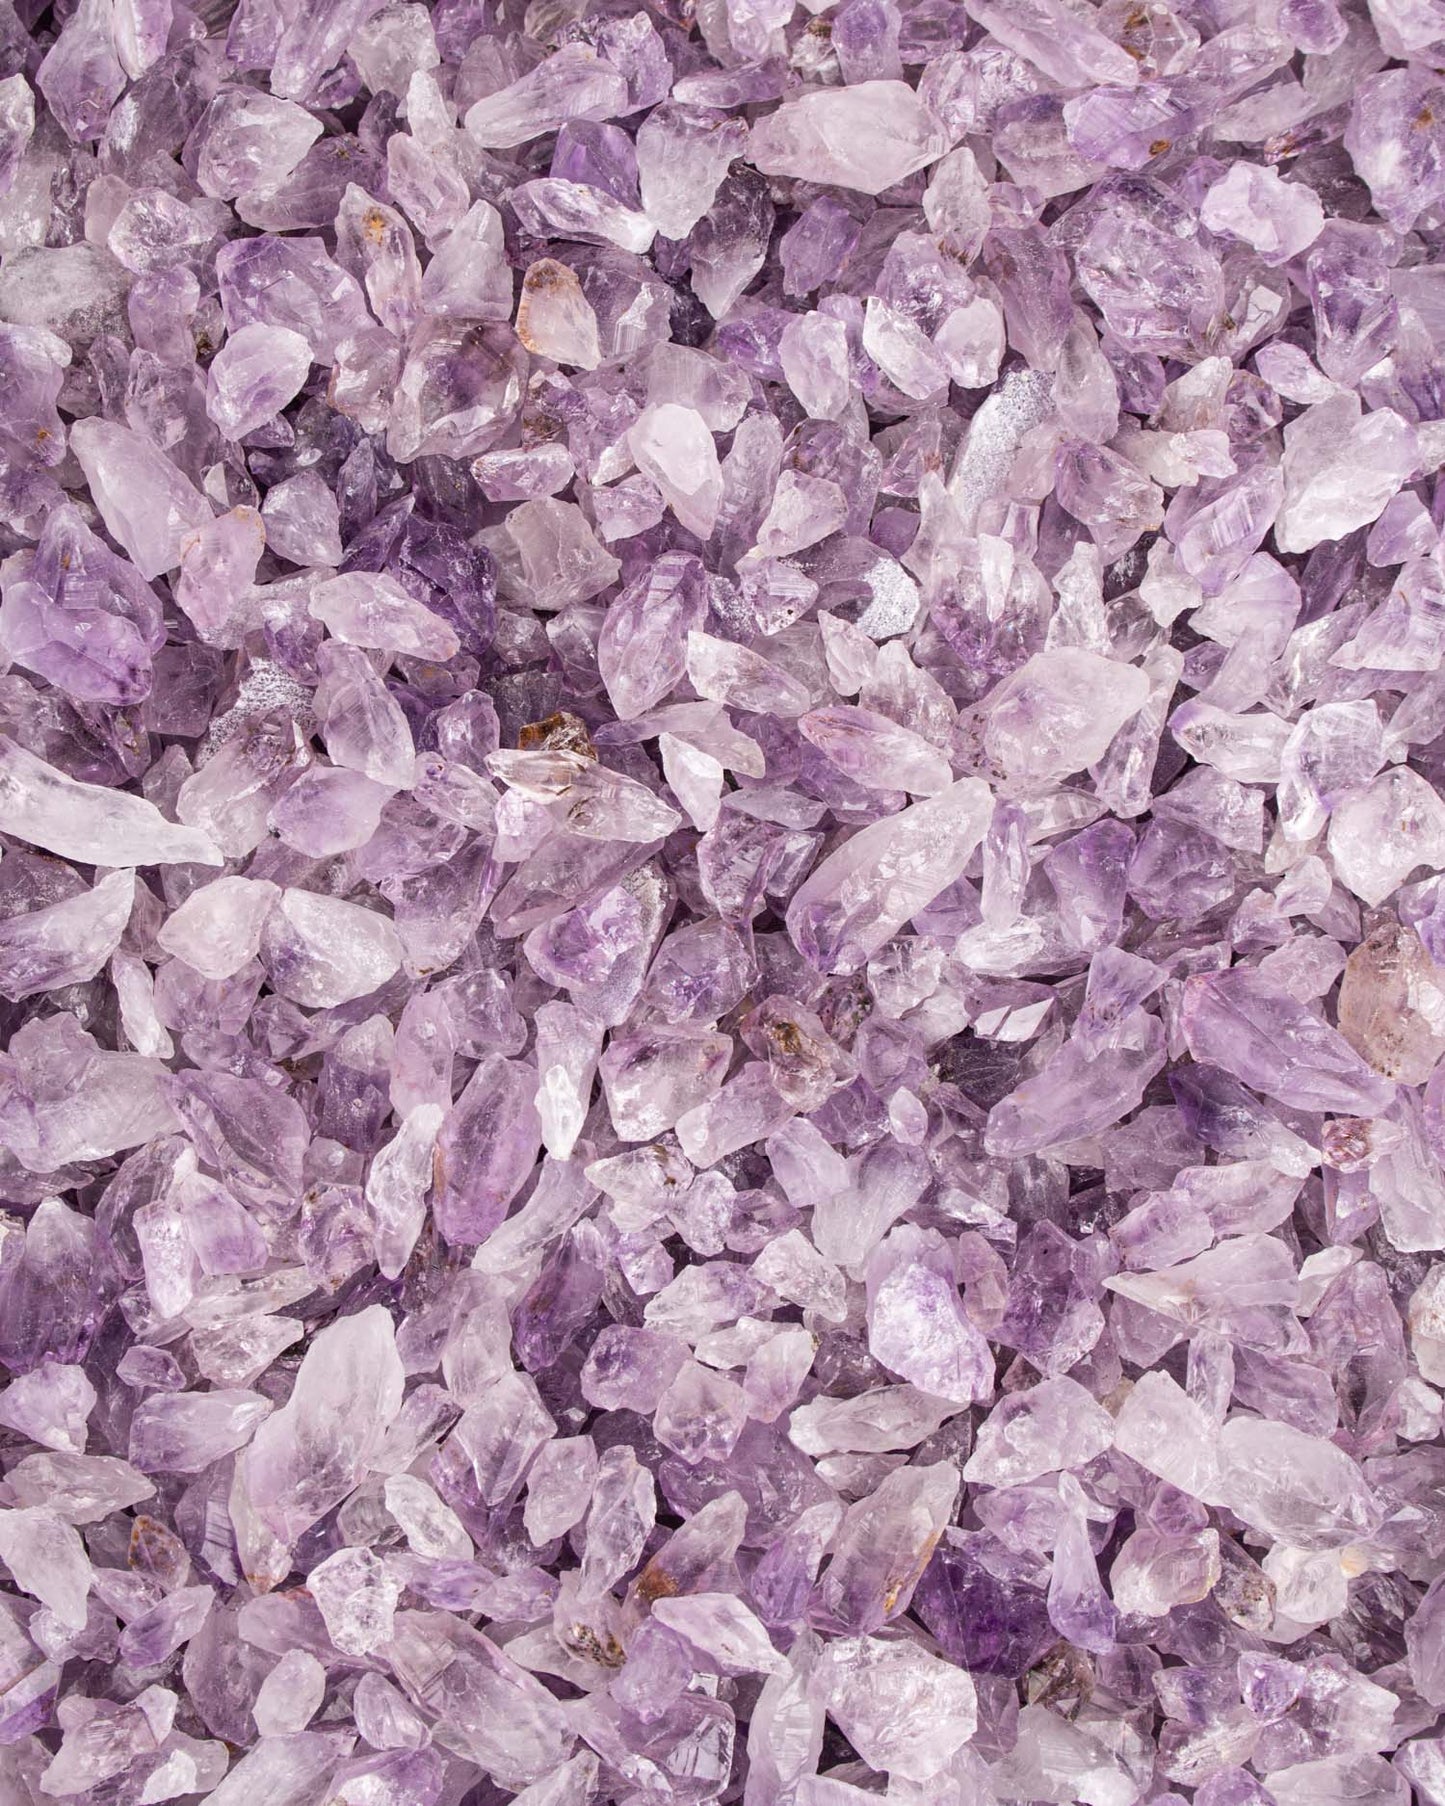 Amethyst Points and Chips - LAST BAG - 75% OFF - 11 pound bag @ $50 + FREE SHIPPING.